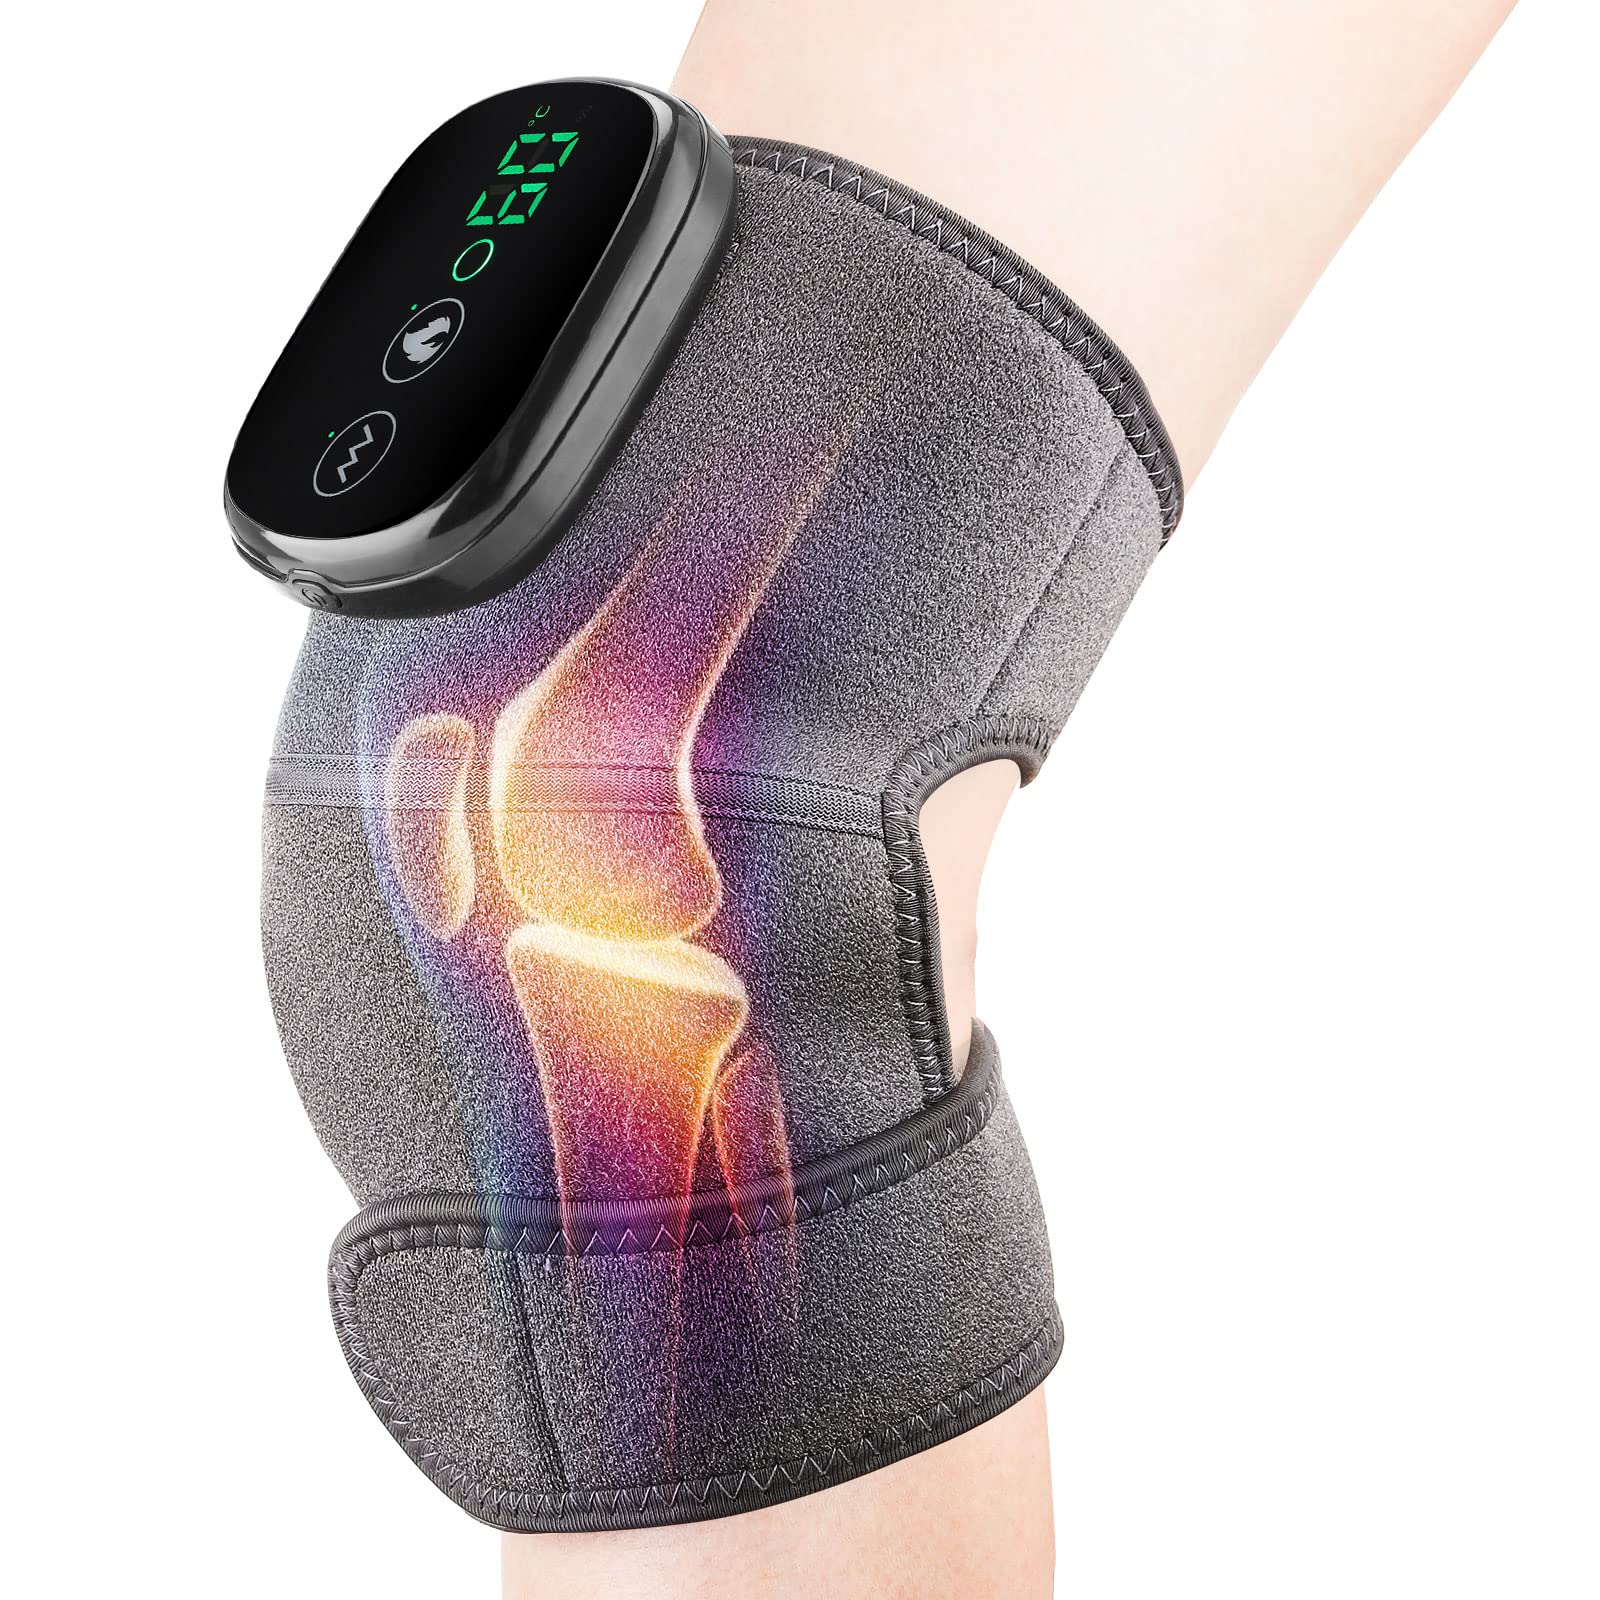 Heated Knee Massager Shoulder Brace, 3-In-1 Heated Knee Elbow Shoulder Brace  Wrap, Vibration Knee Heating Pad, 3 Adjustable Vibrations and Heating Modes,  Heating Pad for Knee Elbow Shoulder Relax